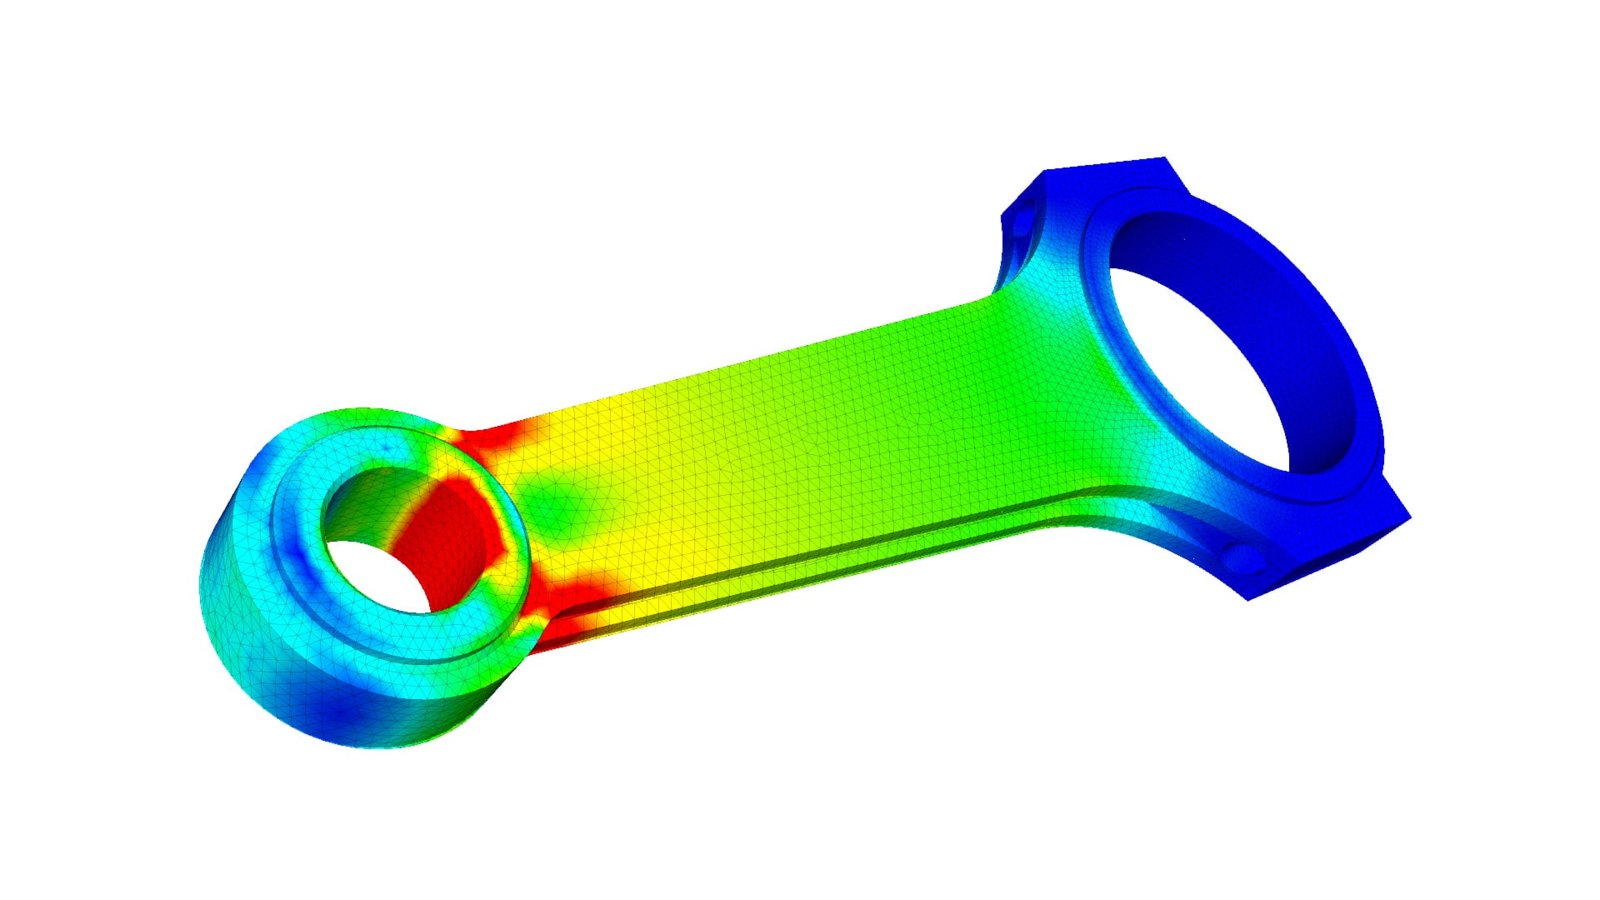 FEA Simulation of a piston rod. The different colors are indicators of variable values that h...jpeg